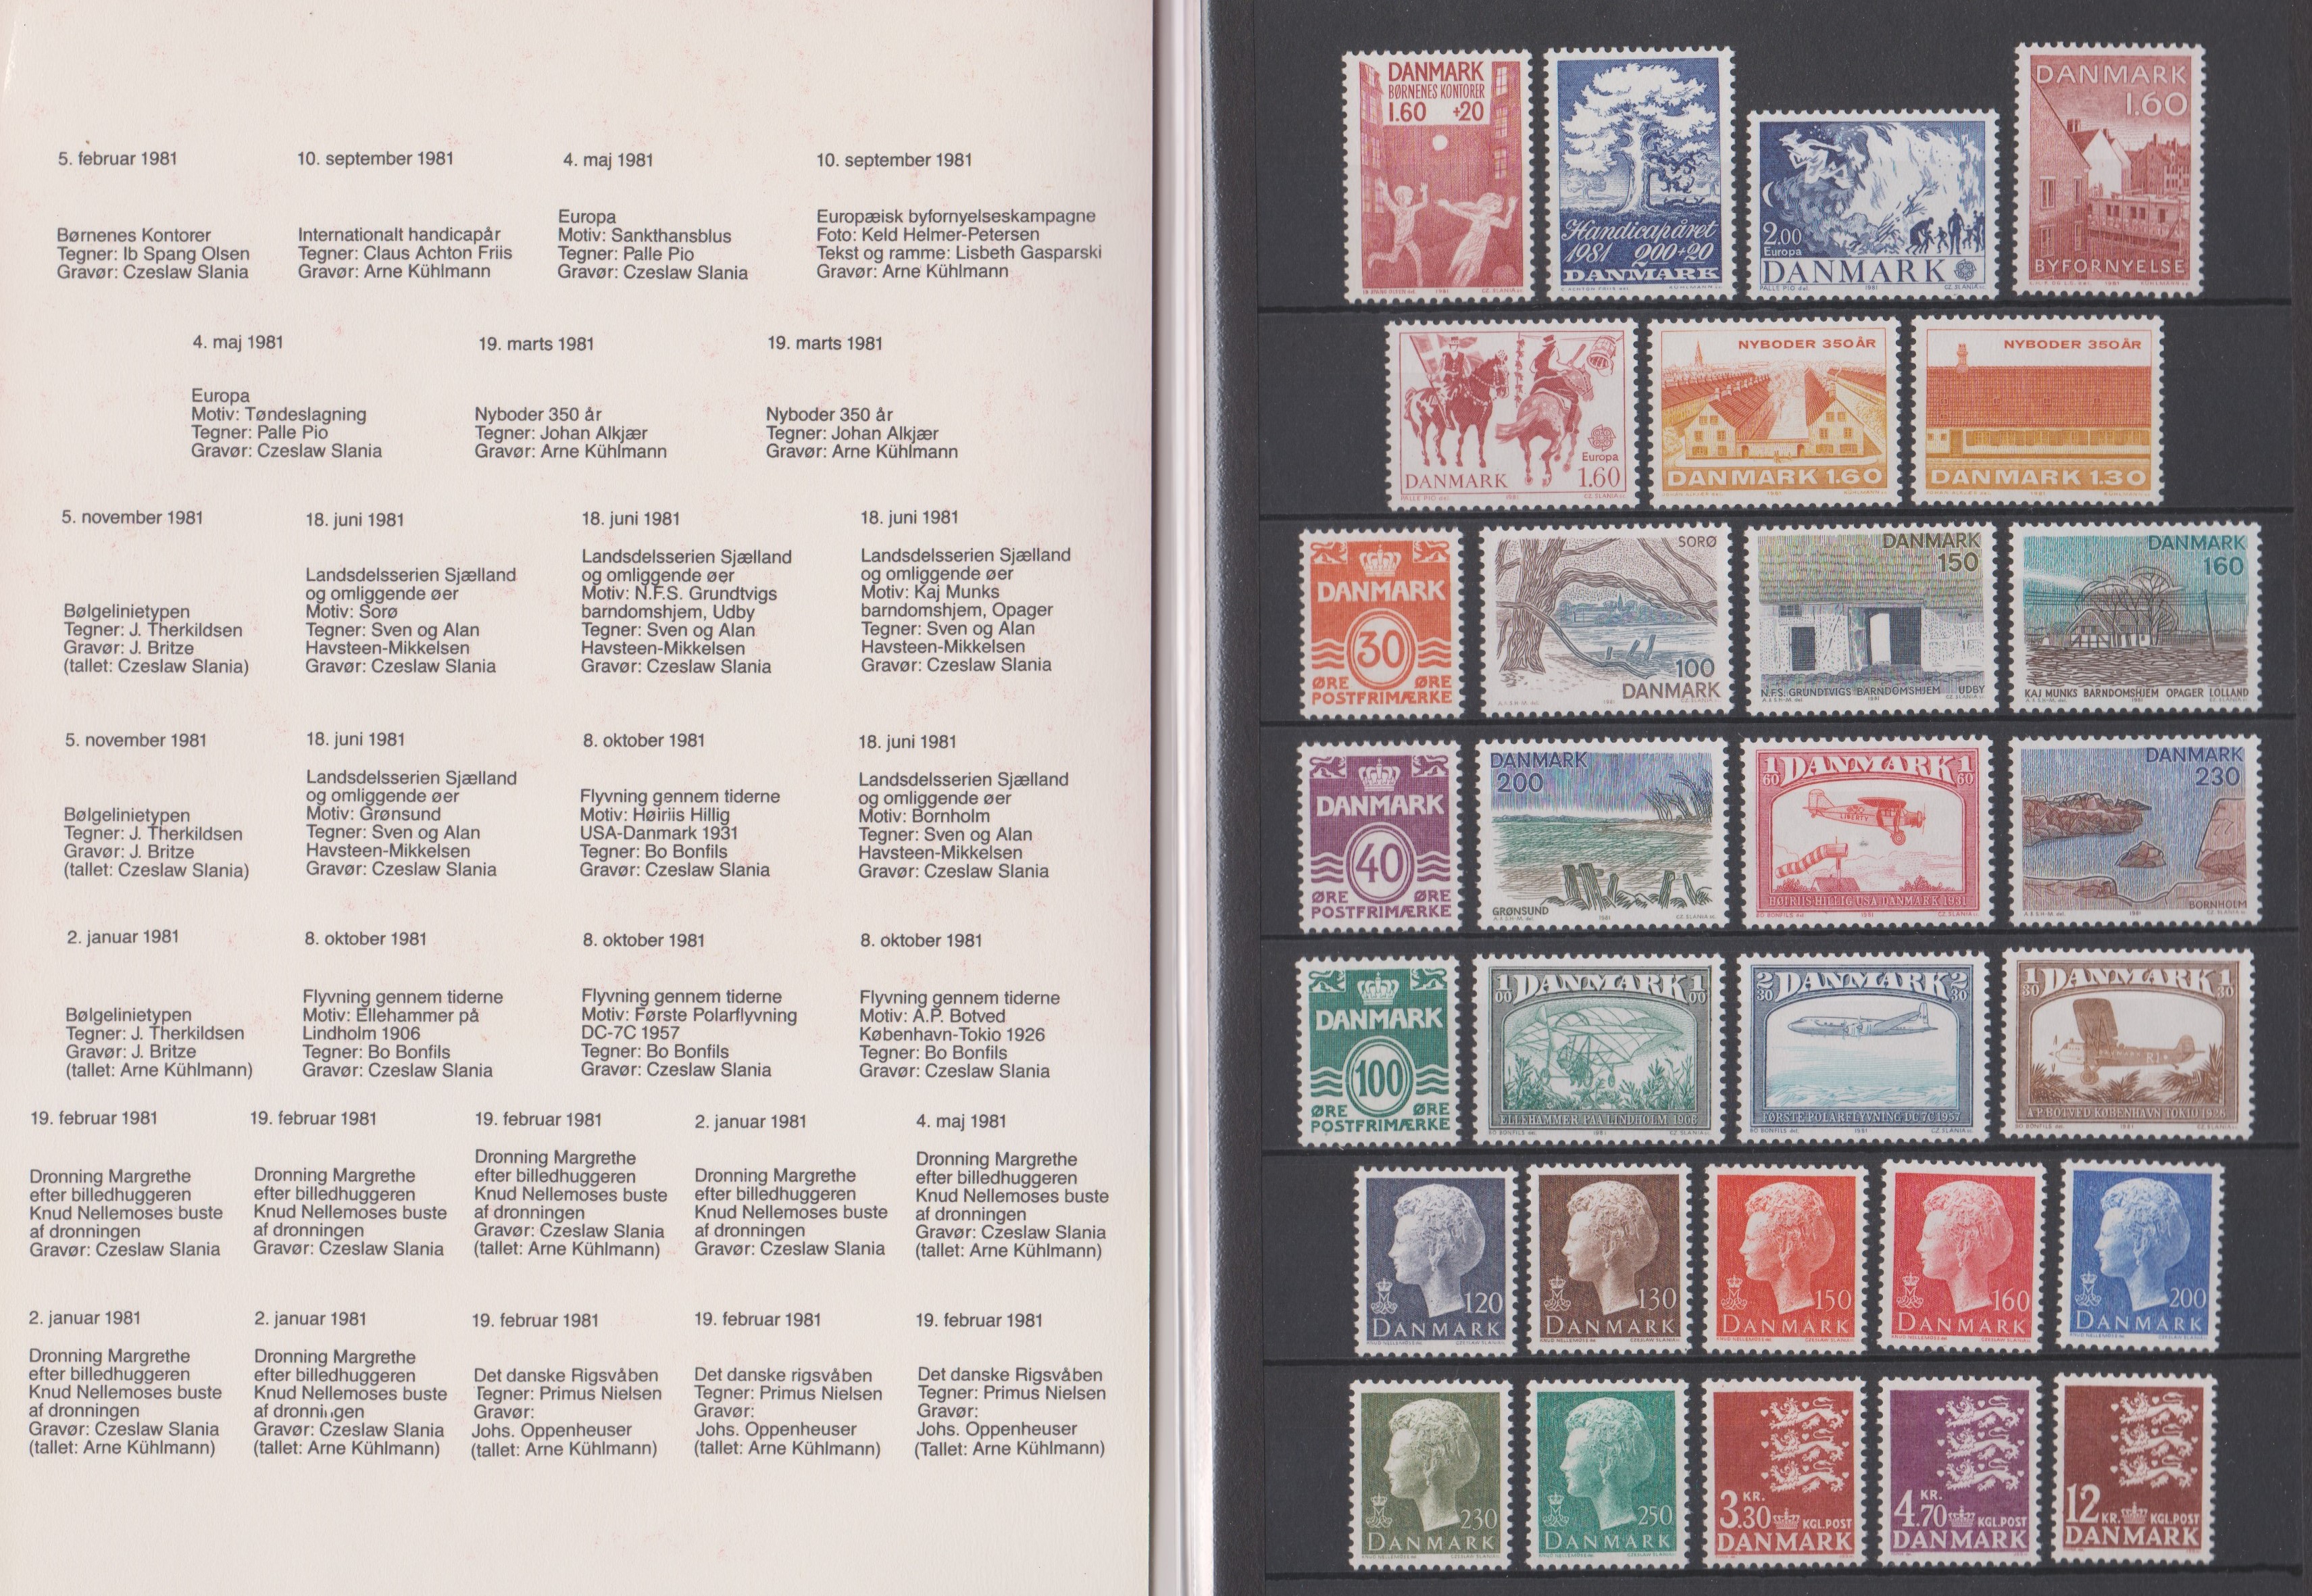 Denmark 1981 Danish Post Year Pack with Mint Issues complete with descriptive text.